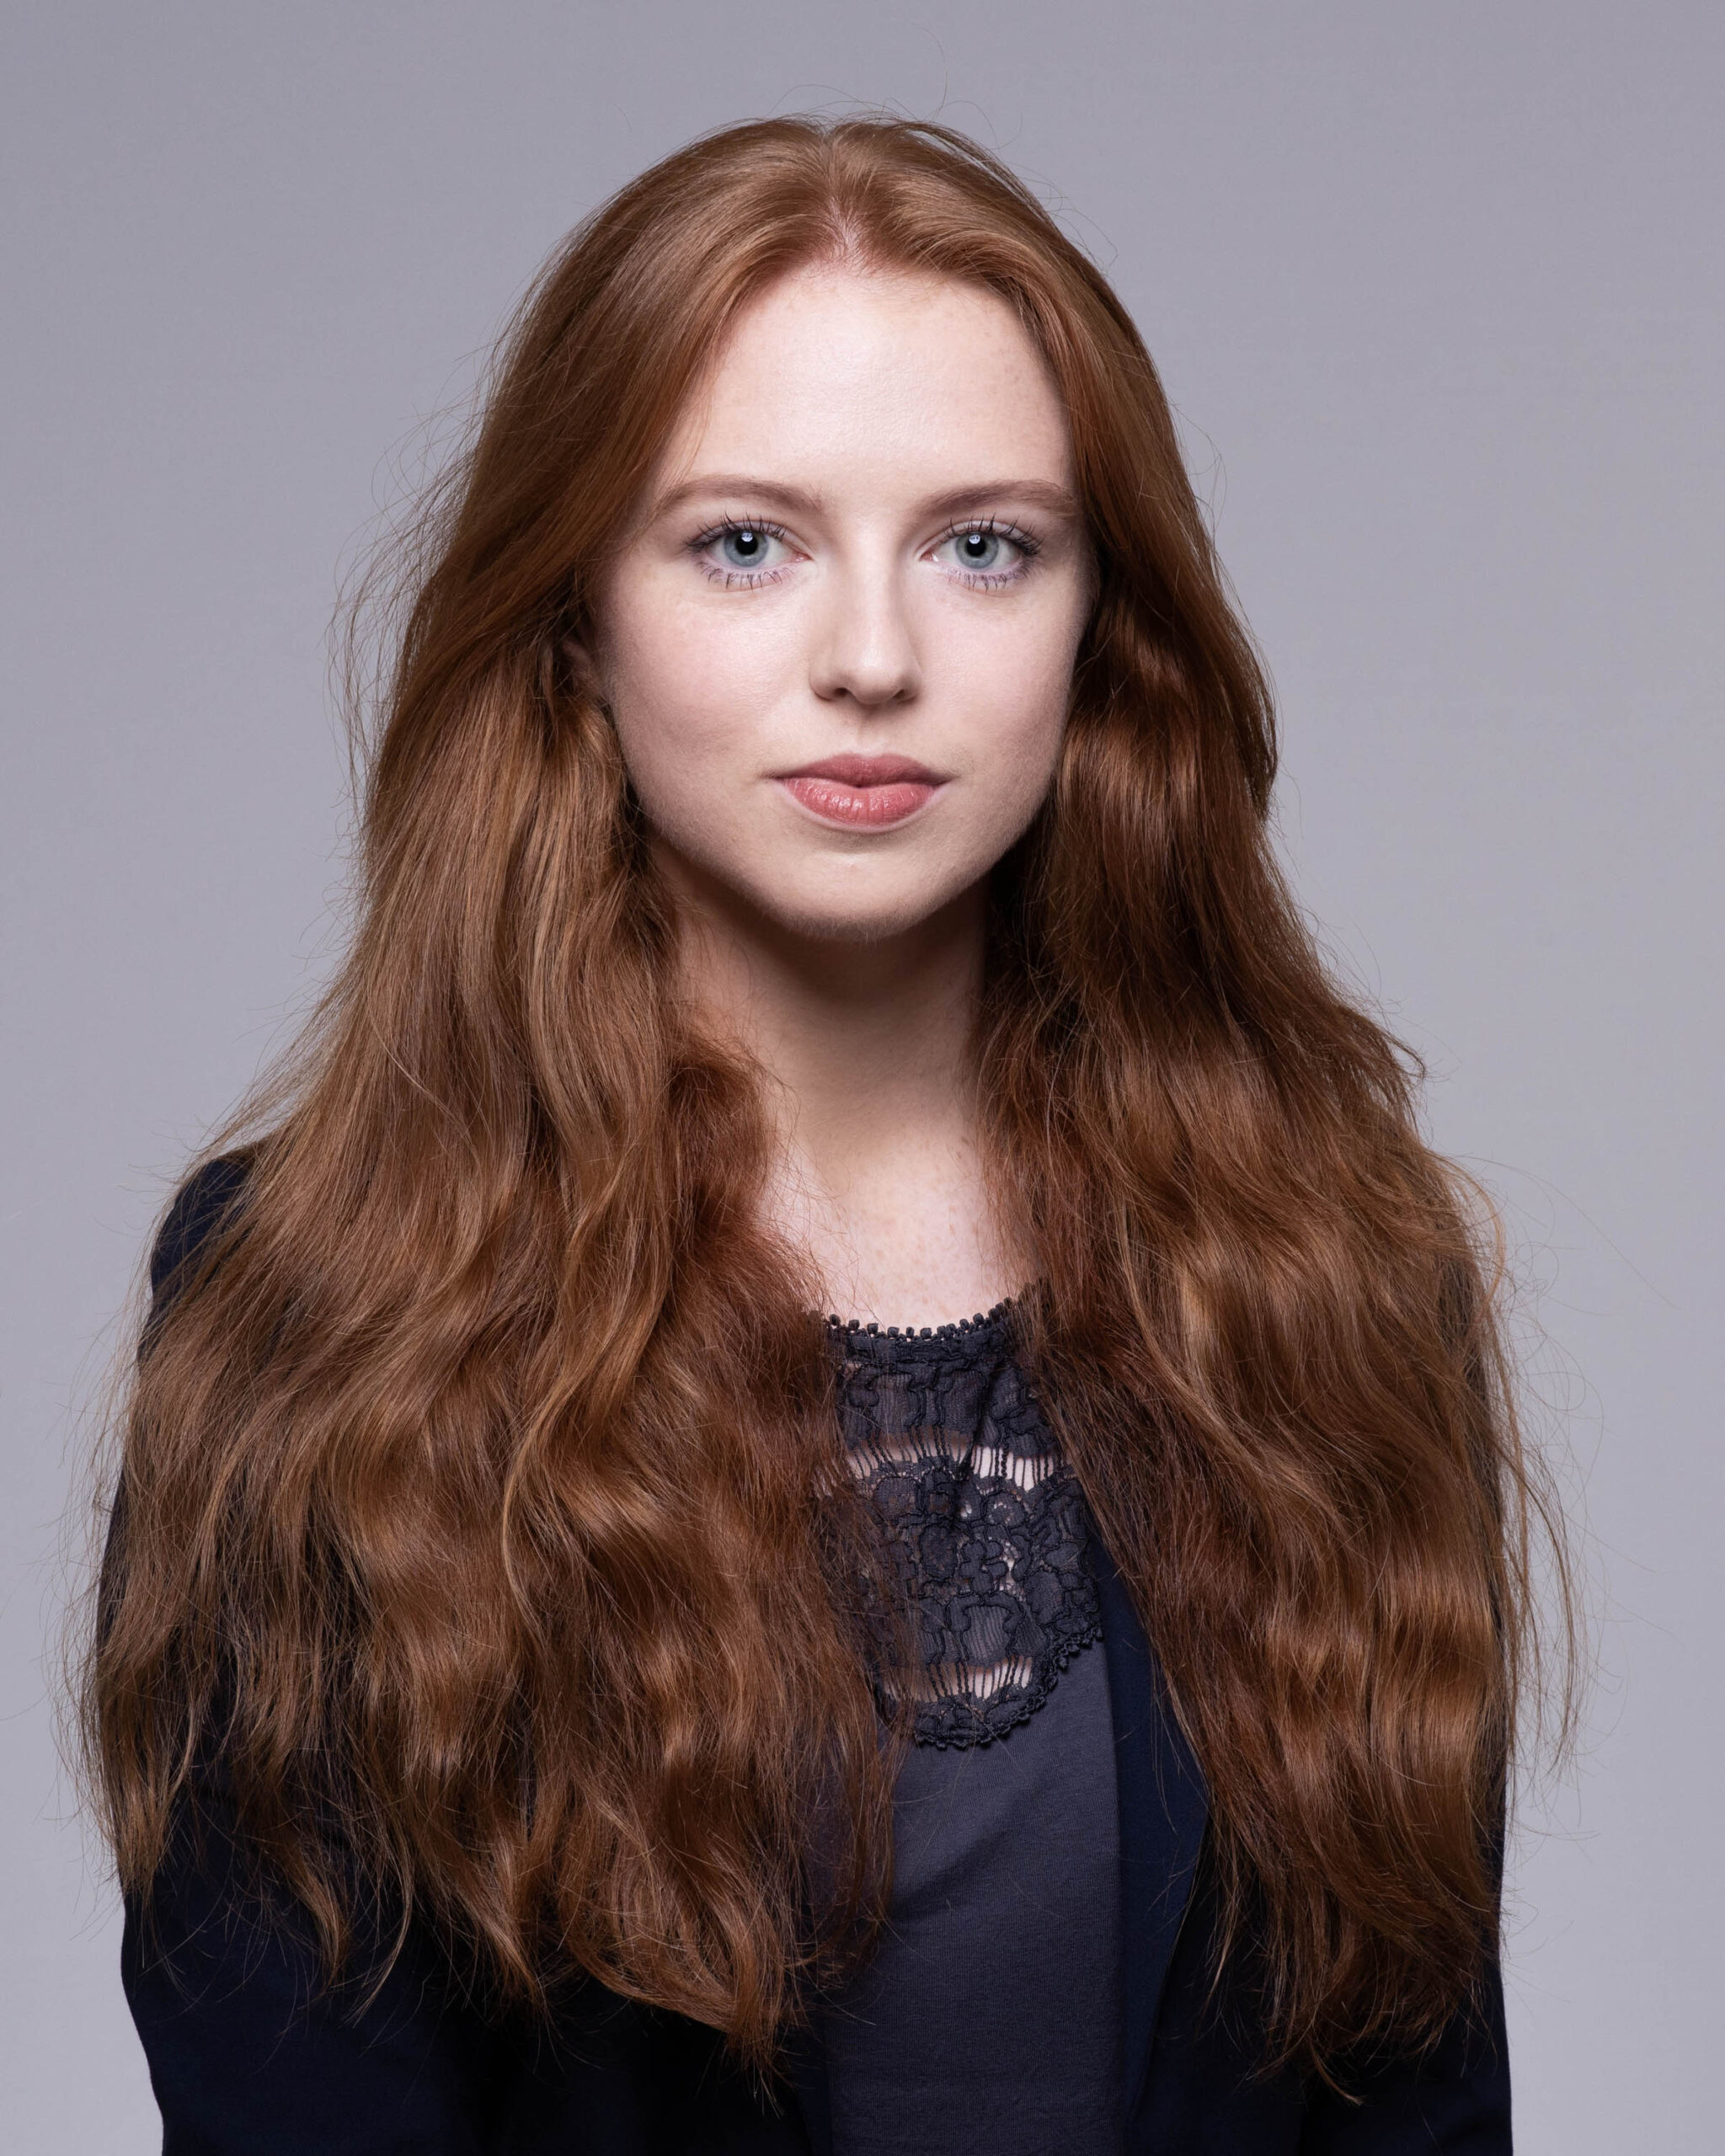 Chestnut hair young lady direct to camera headshot